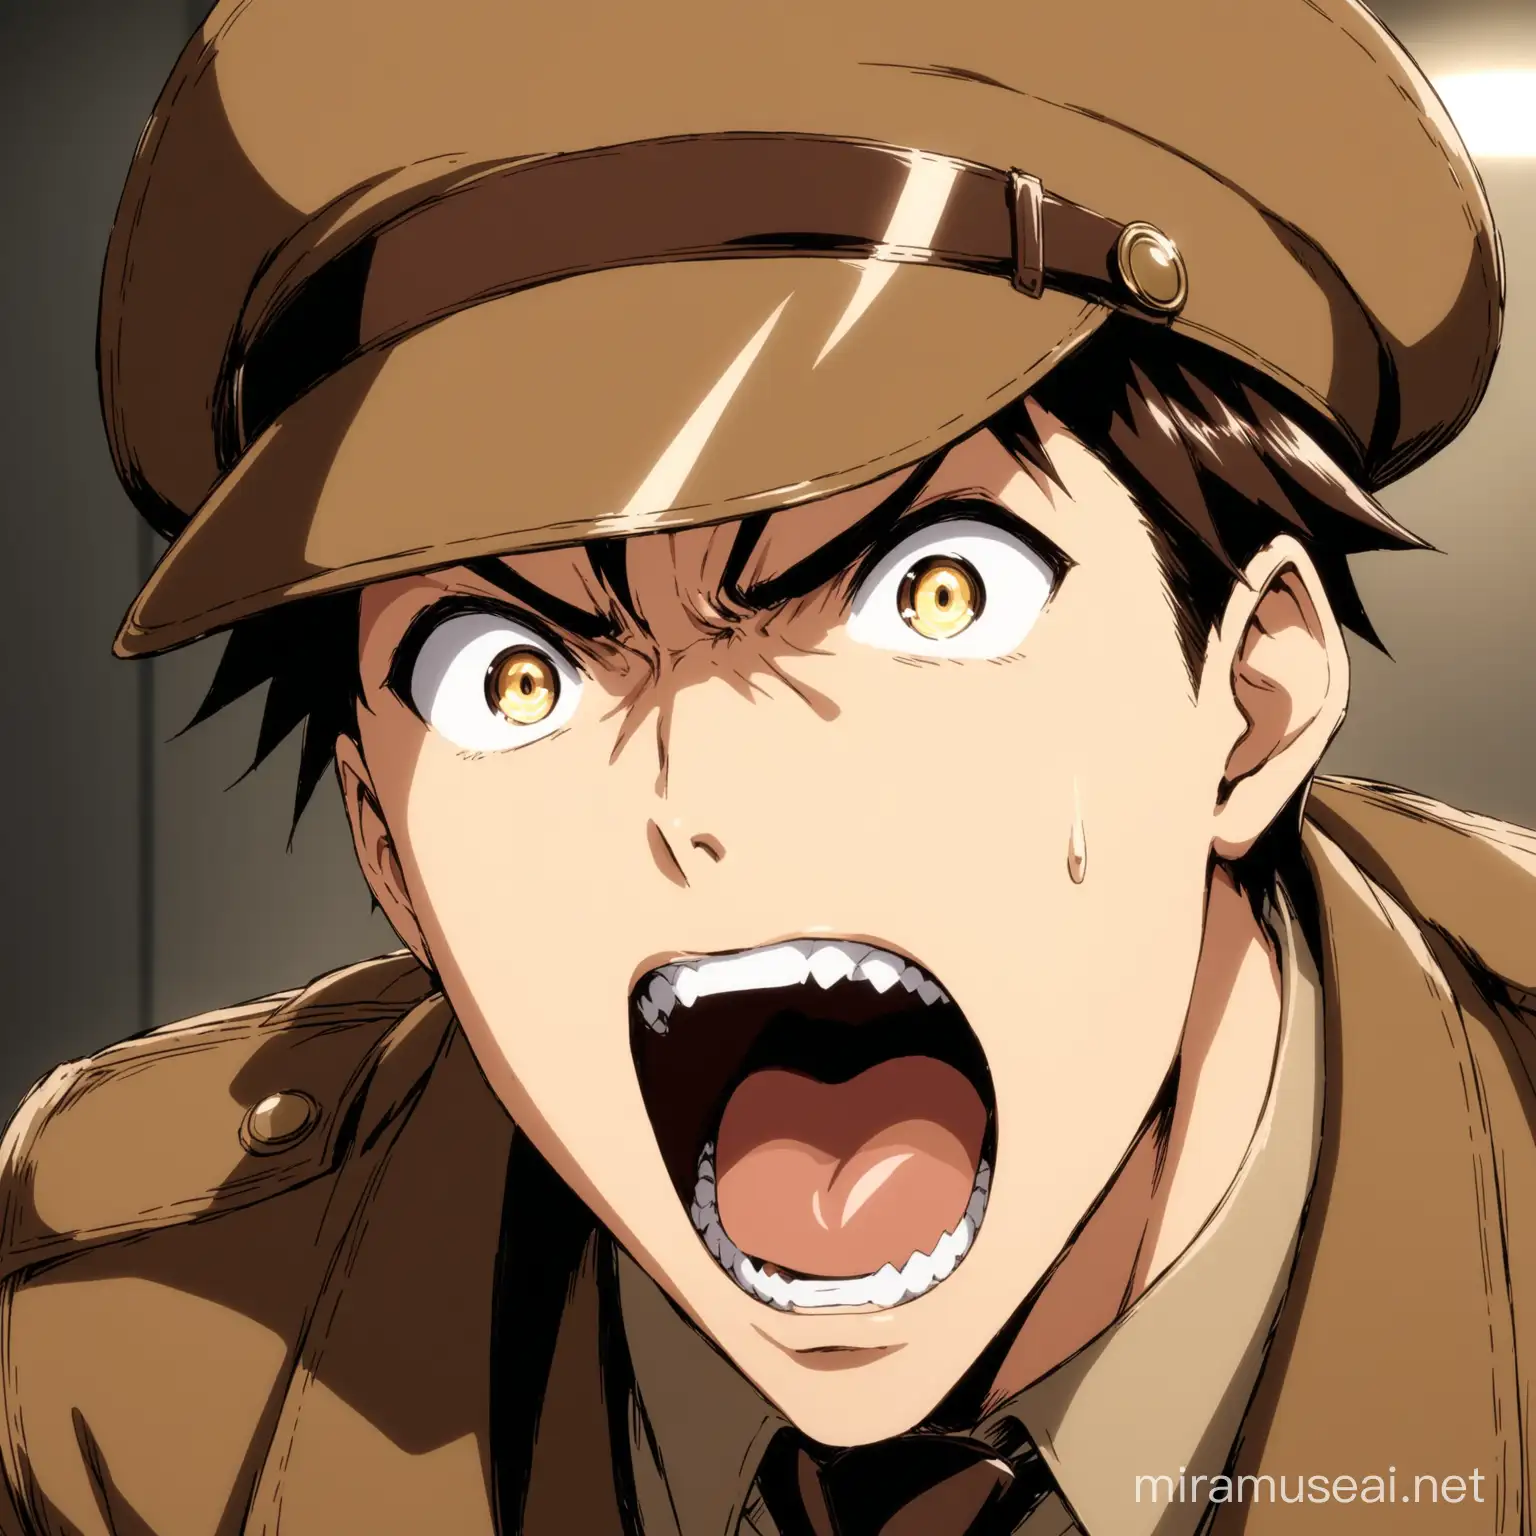 An image of an anime male character's mouth screaming loudly wearing brown detective clothes